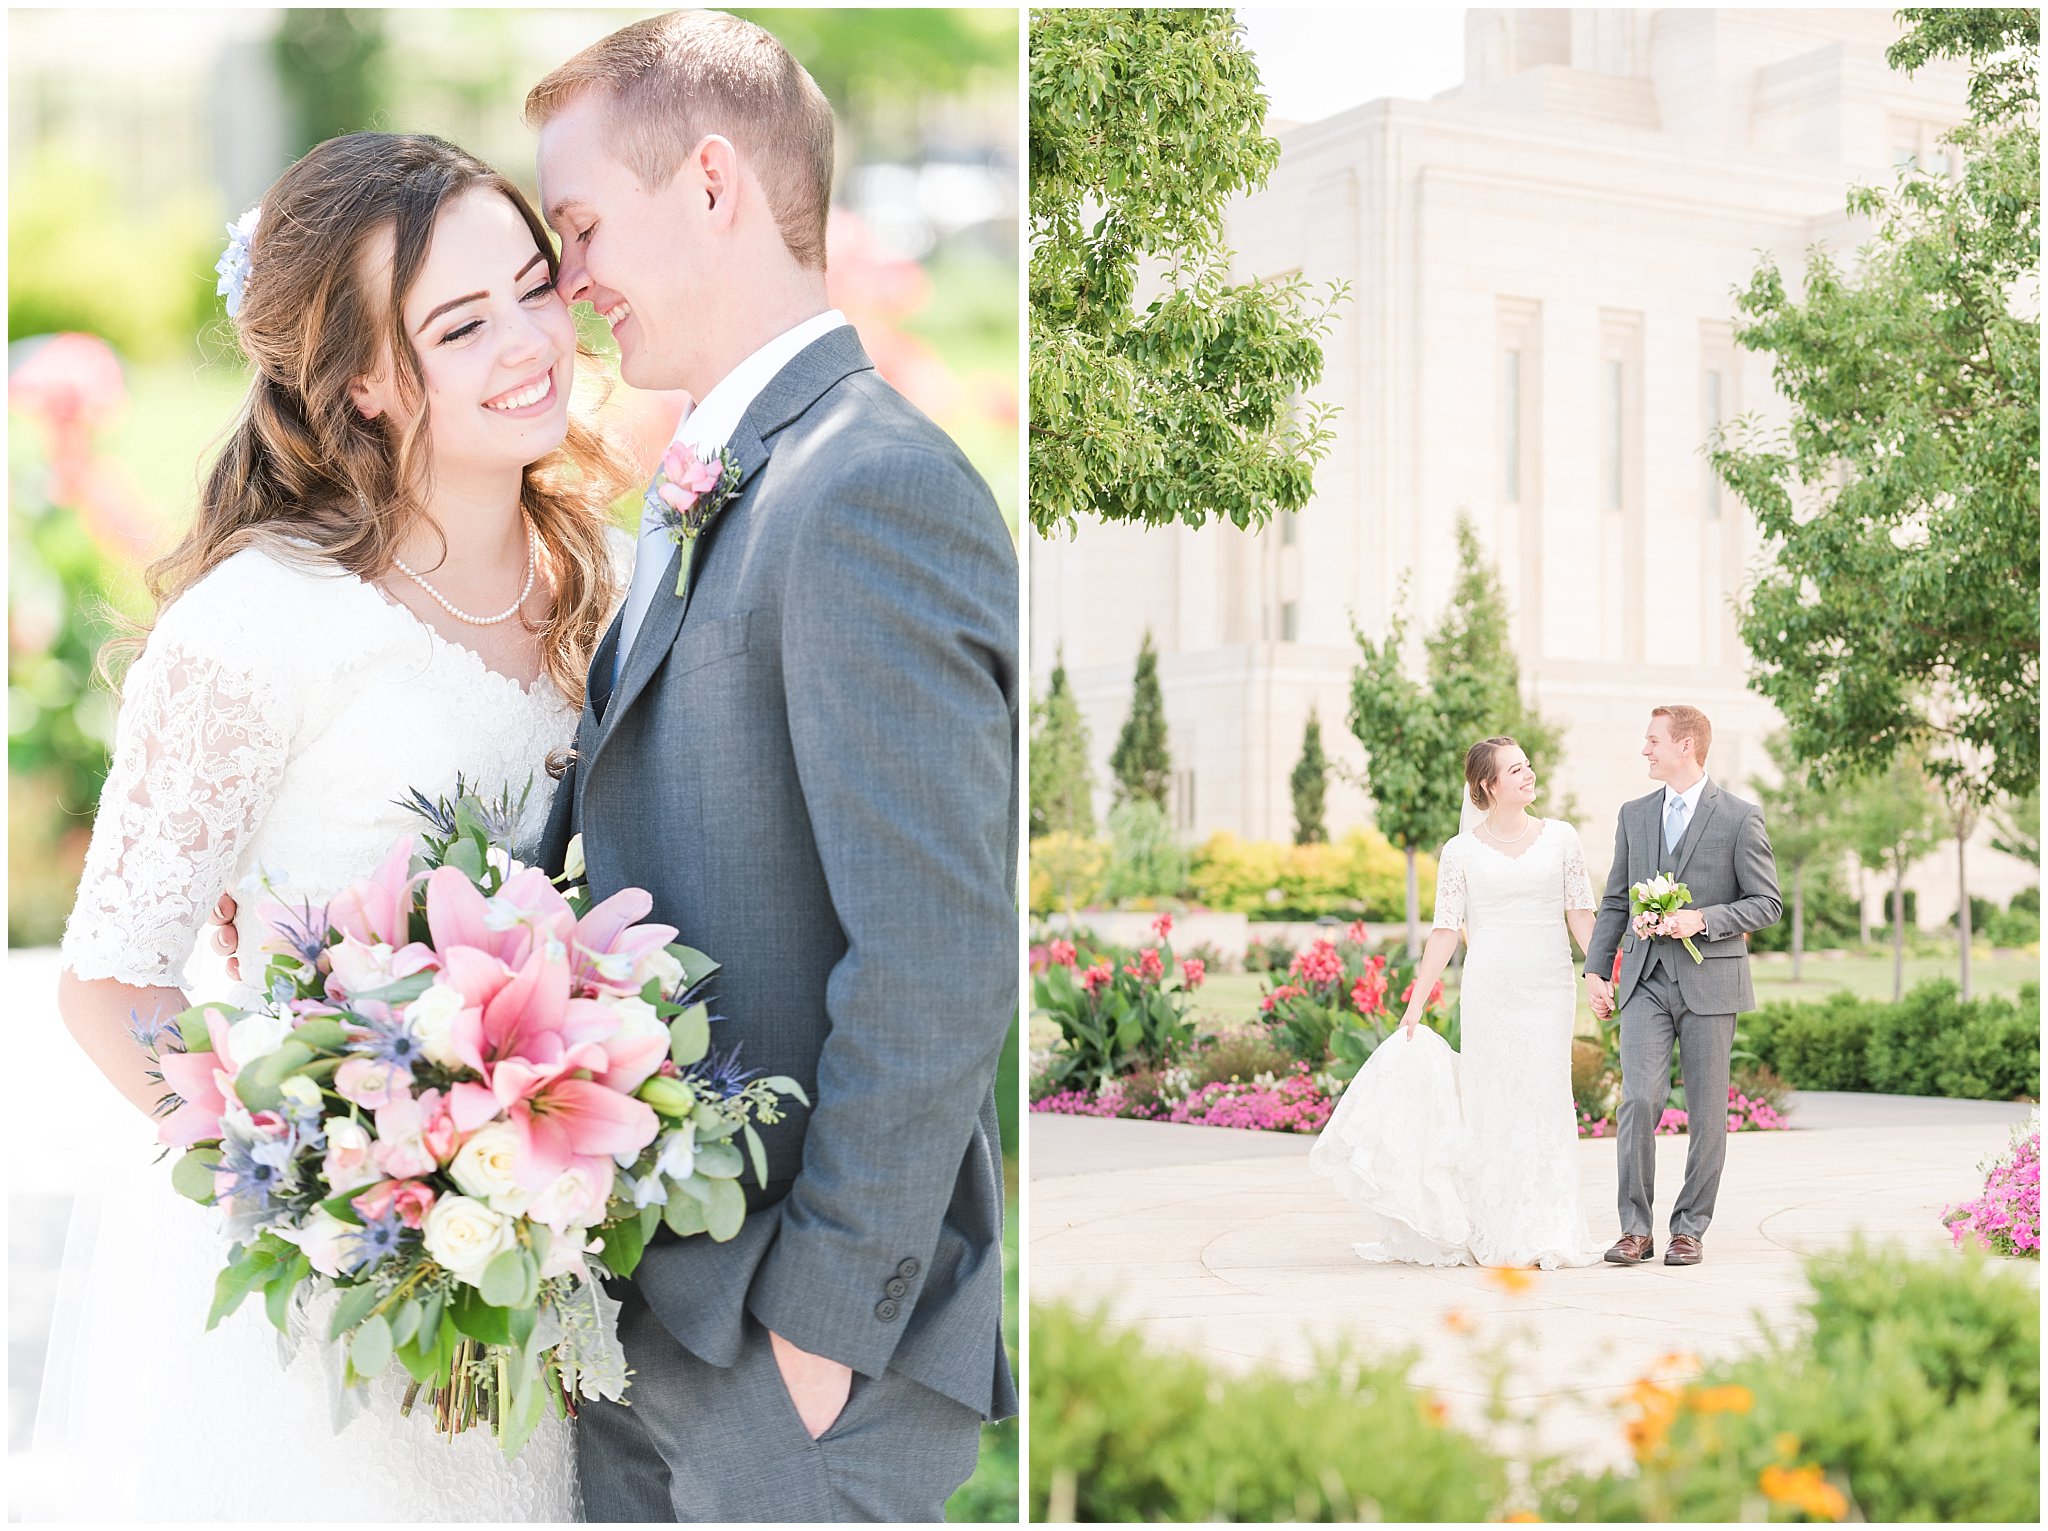 Bride with lace wedding dress and veil and groom wearing grey suit with light blue tie | bride and groom portraits | Ogden Temple Summer Wedding | Jessie and Dallin Photography